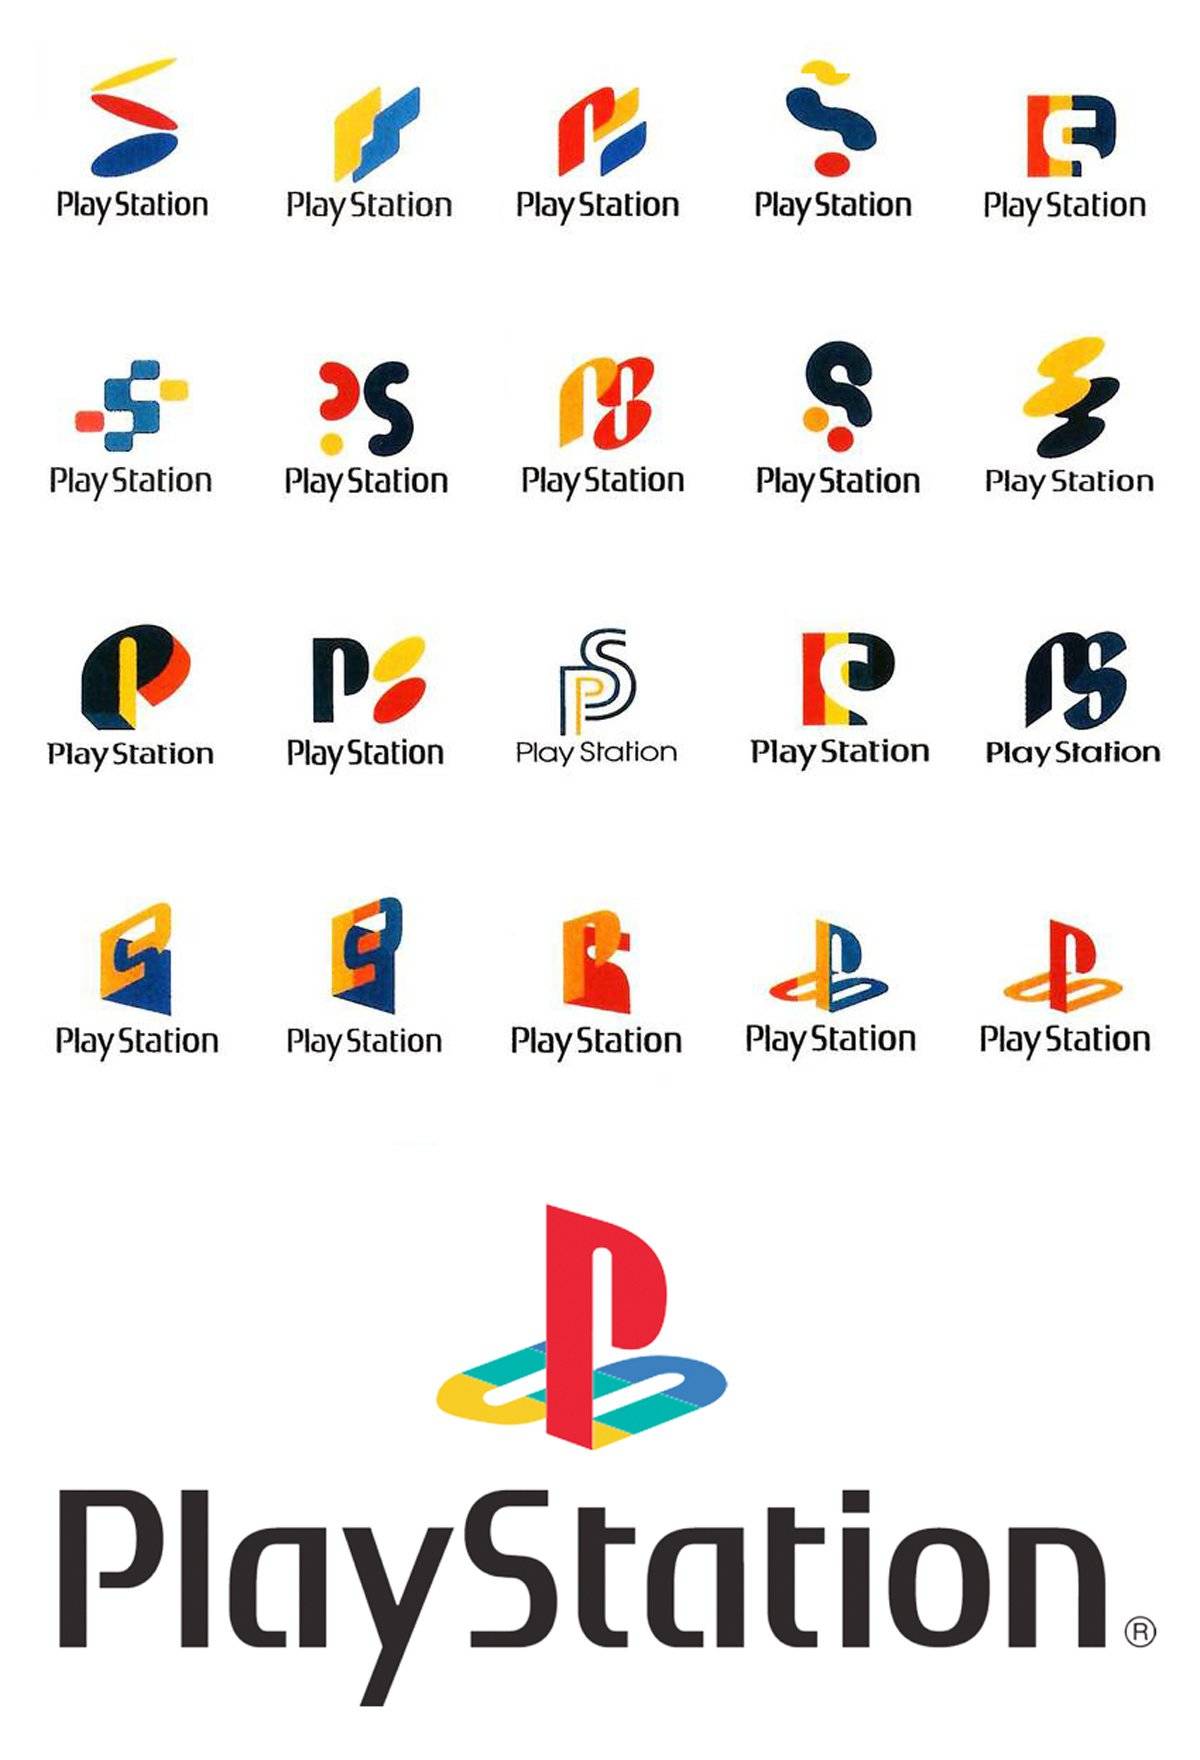 Sony Playstation 1 logo design ideas and concepts